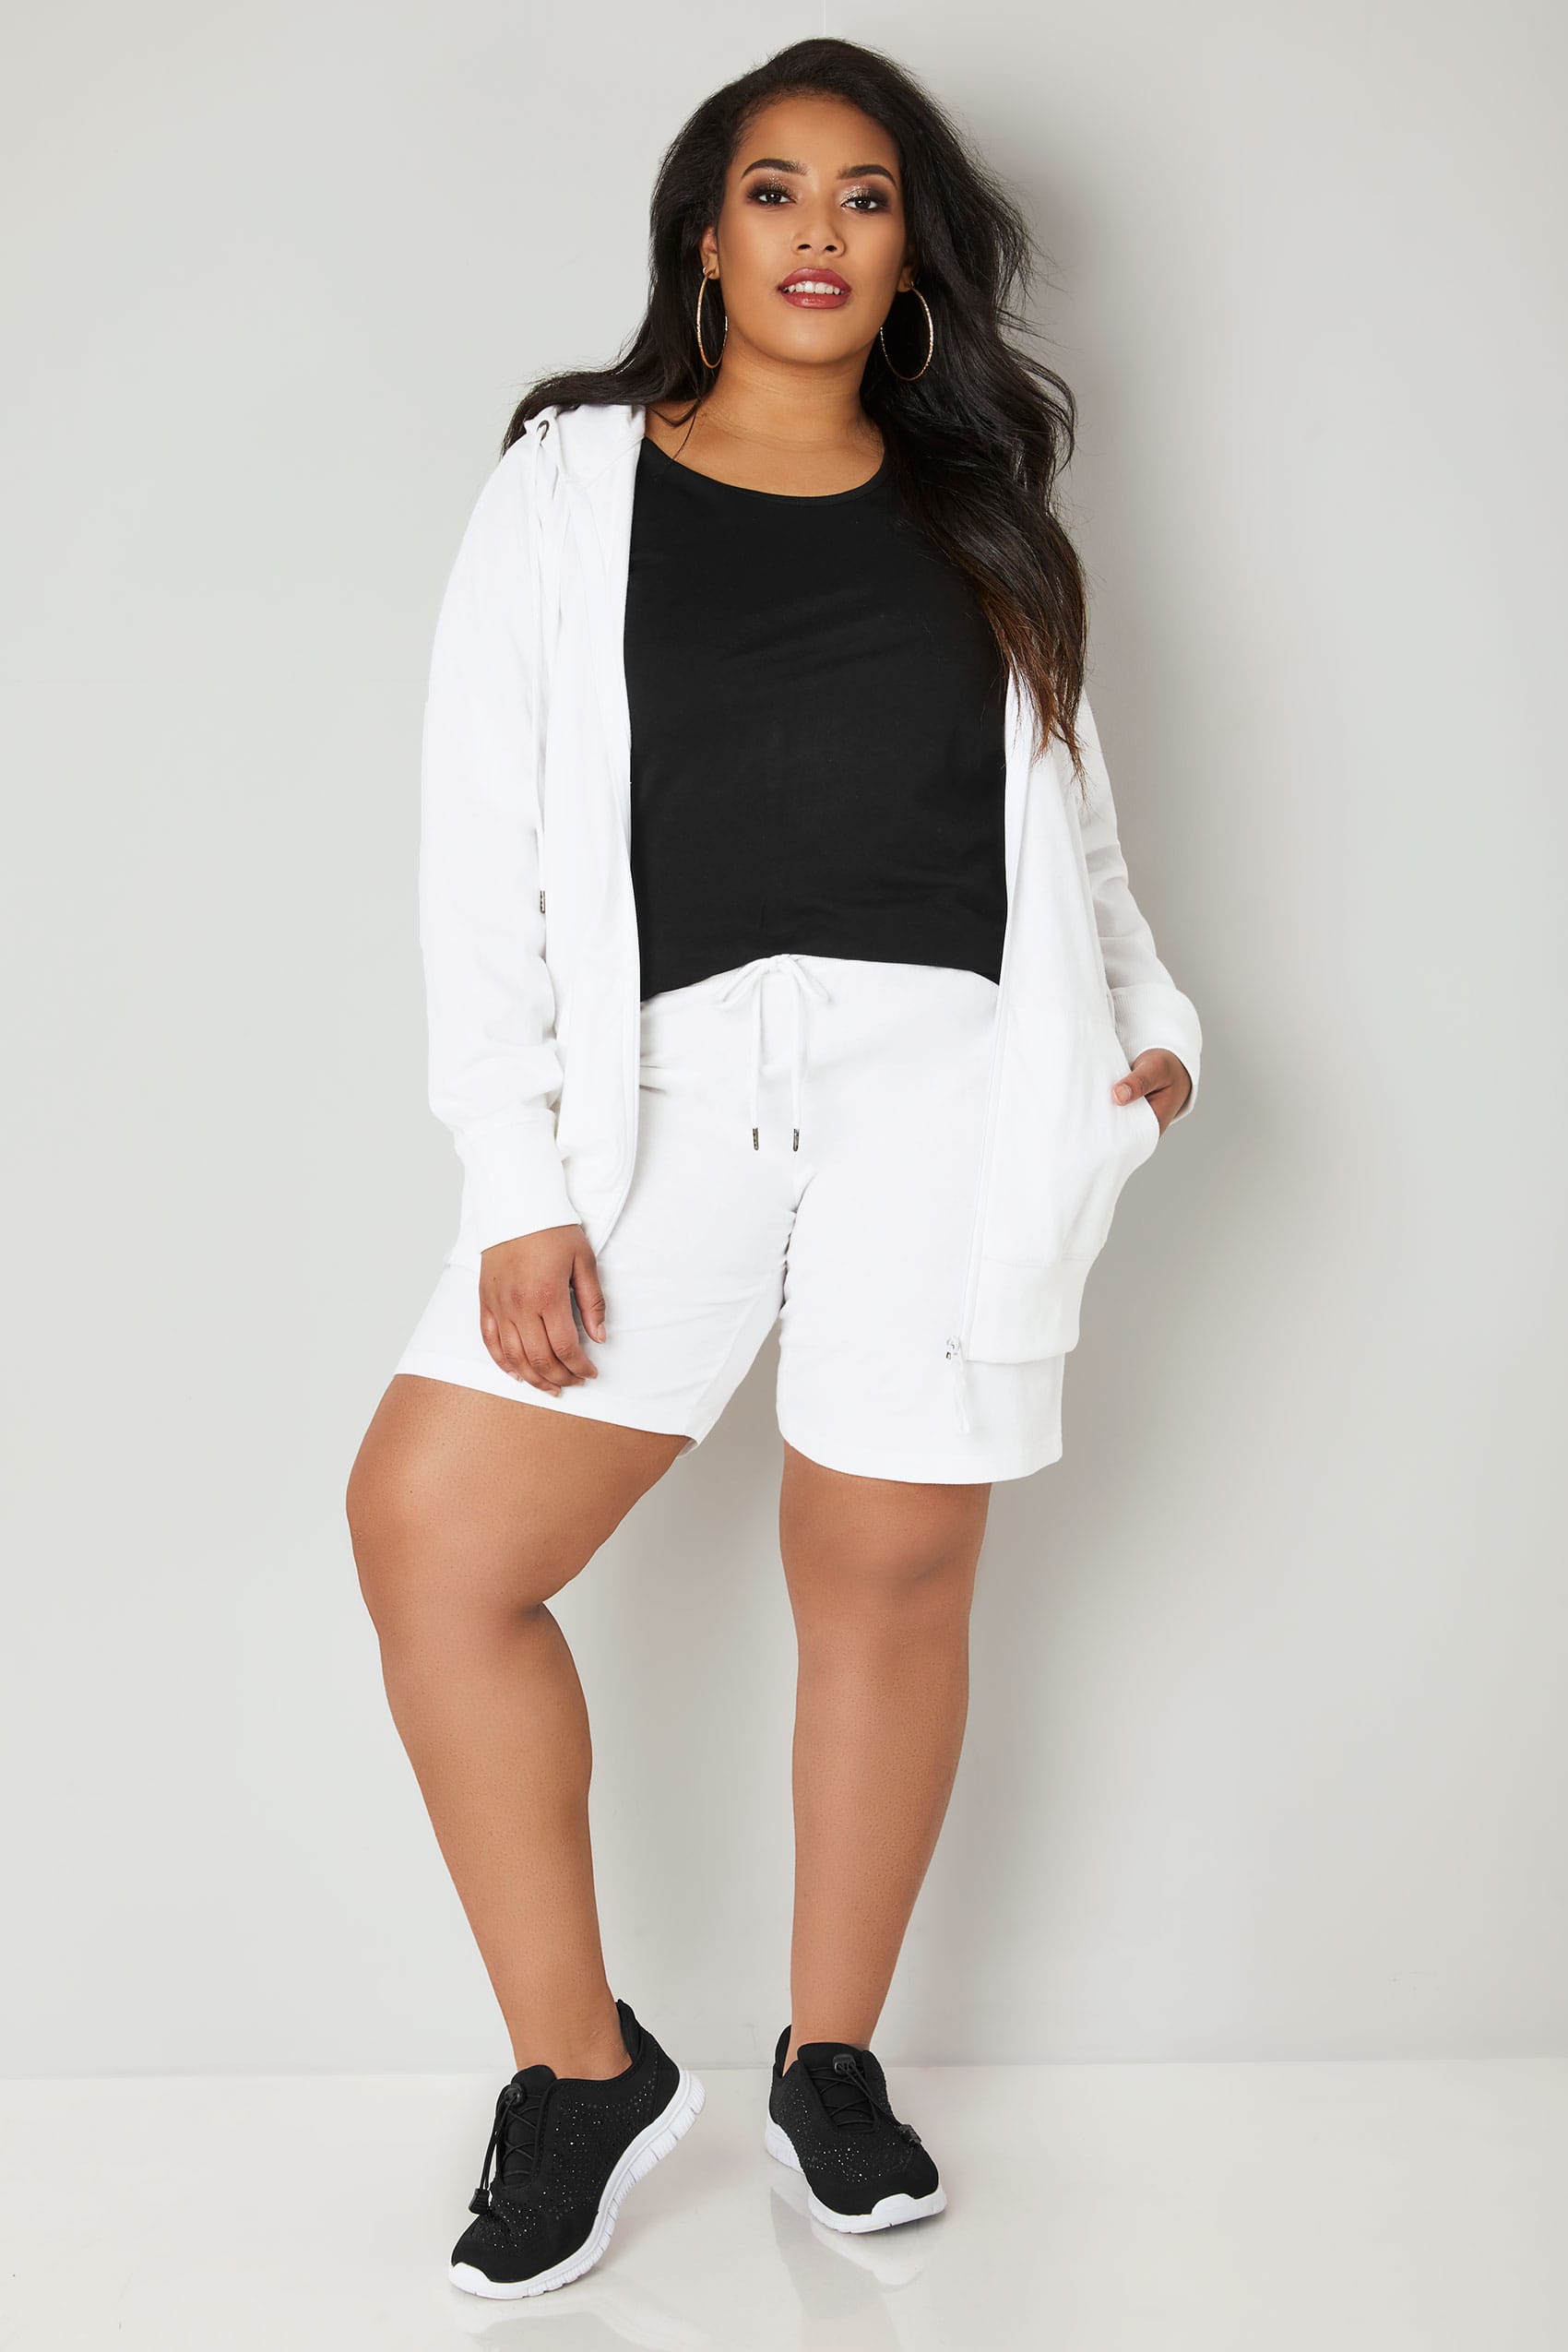 White Jersey Shorts With Elasticated Waistband, plus size 16 to 36